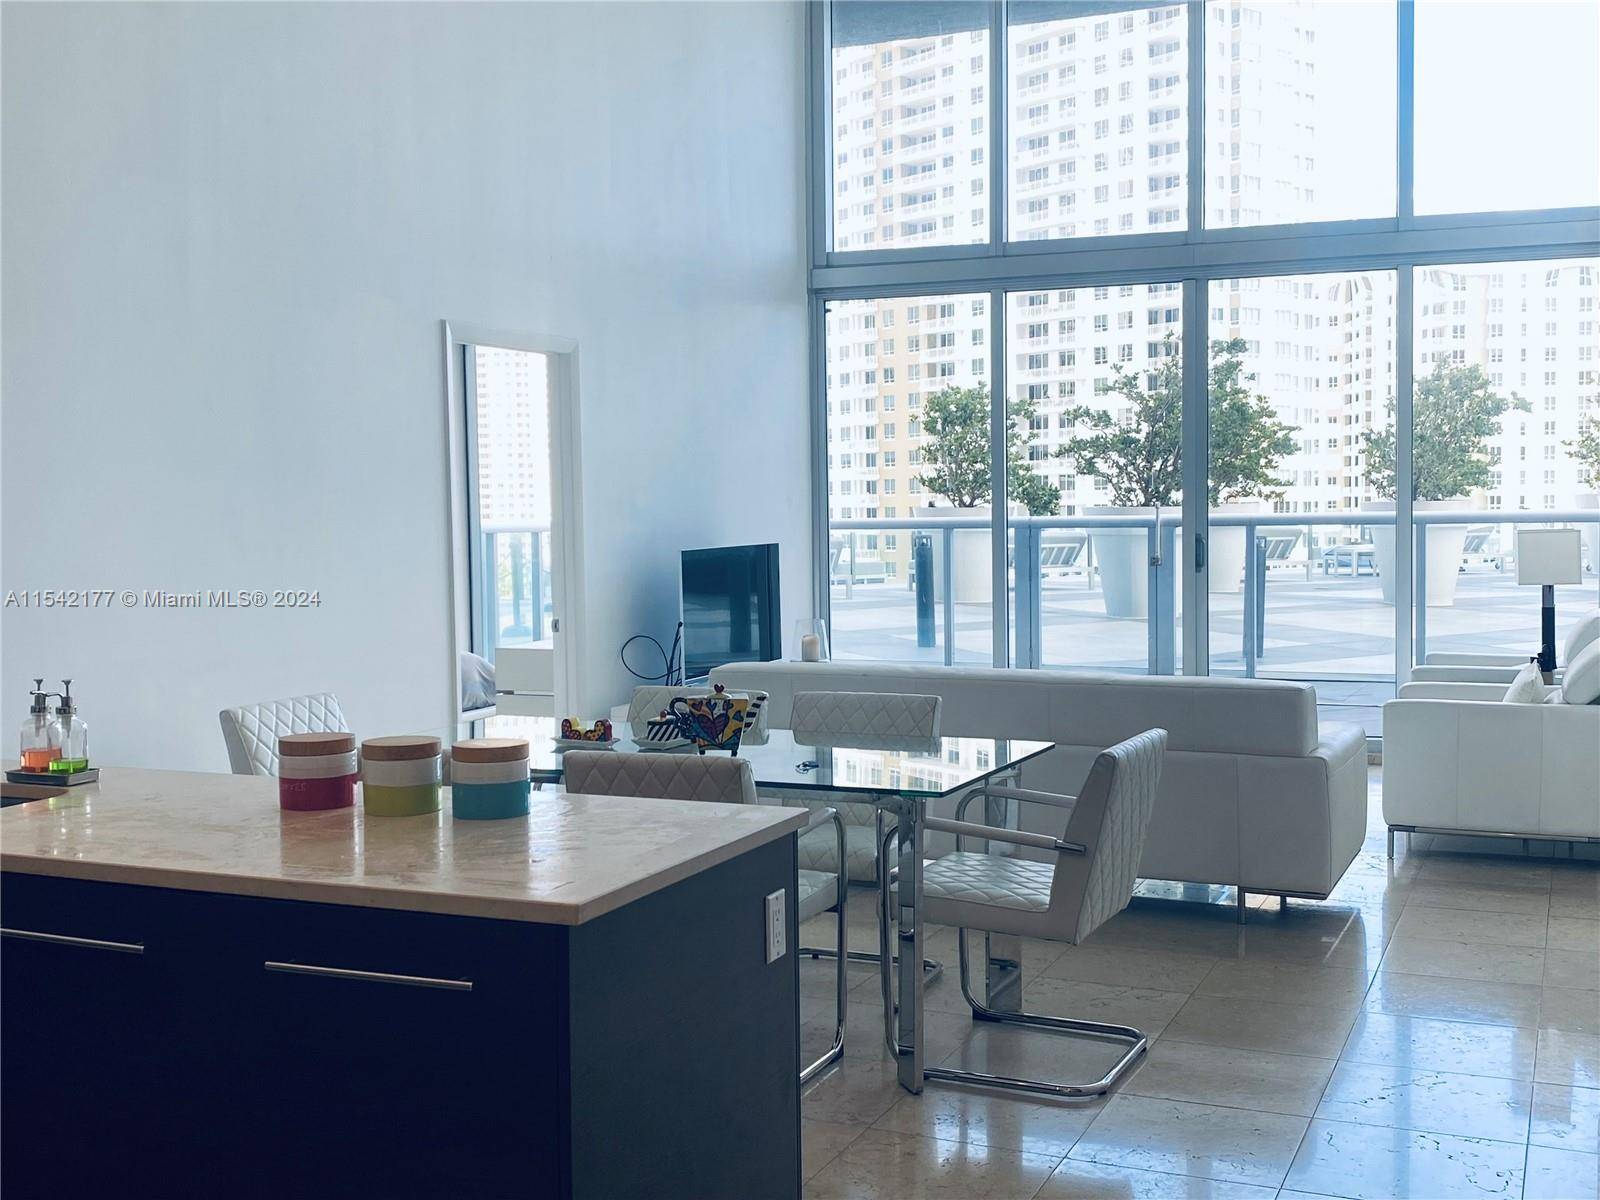 ABSOLUTLEY STUNNING 16' HIGH FLOOR TO CEILING WINDOWS 2BEDROOM 2BATHROOM WITH DEN FULLY FURNISHED, SITUATED RIGHT ON THE ICON BRICKELL POOL DECK OVERSIZED BALCONY PRIVATE PATIO AREA.